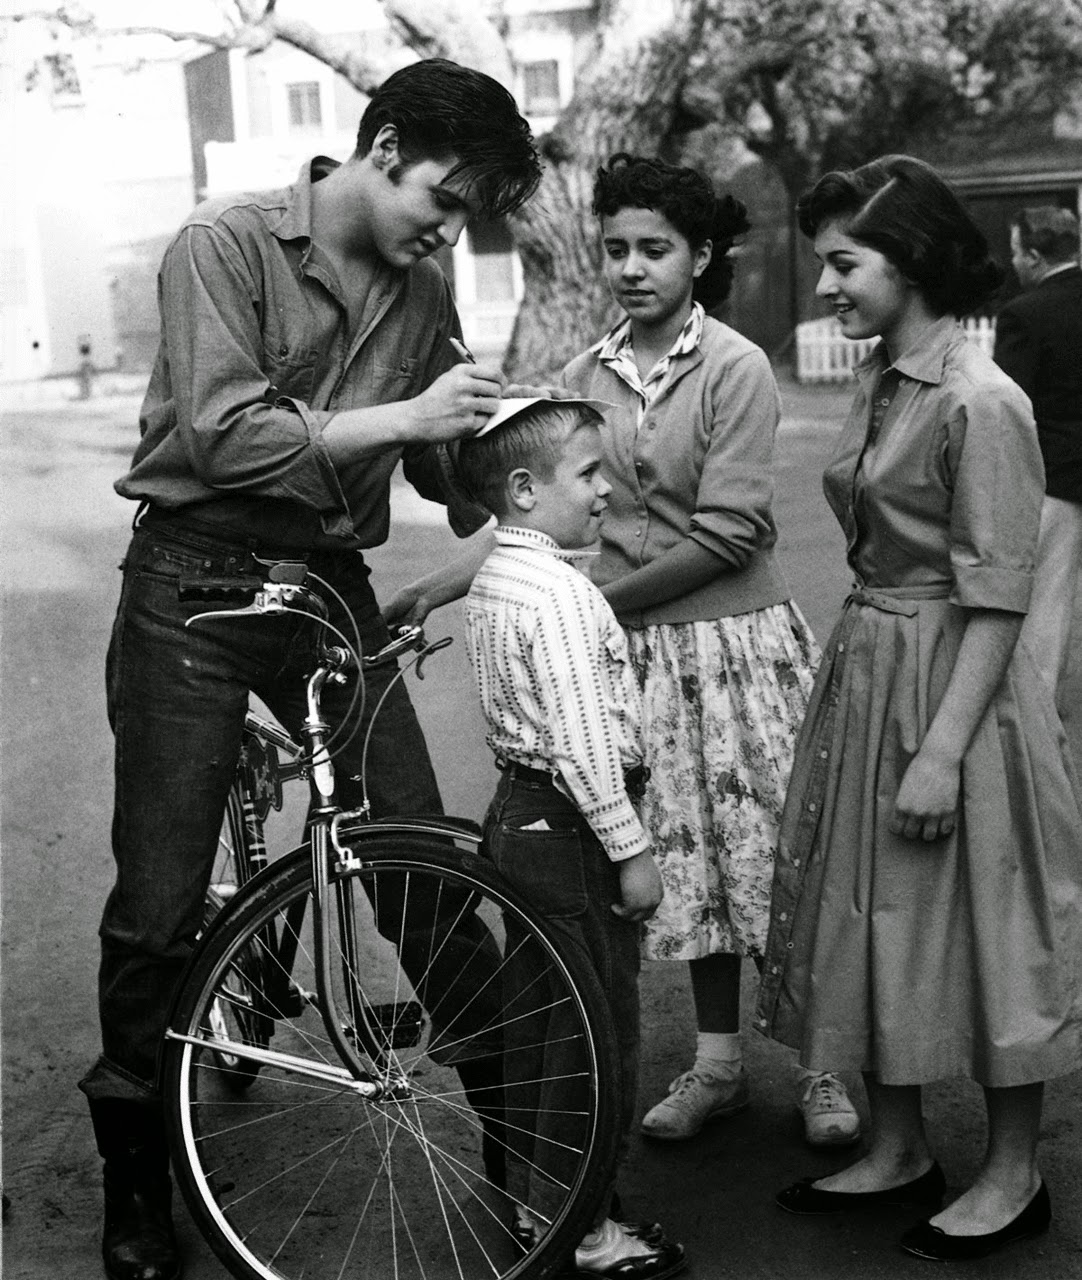 Elvis Presley riding a bike, stops to sign autographs for fans in Germany in 

1959.